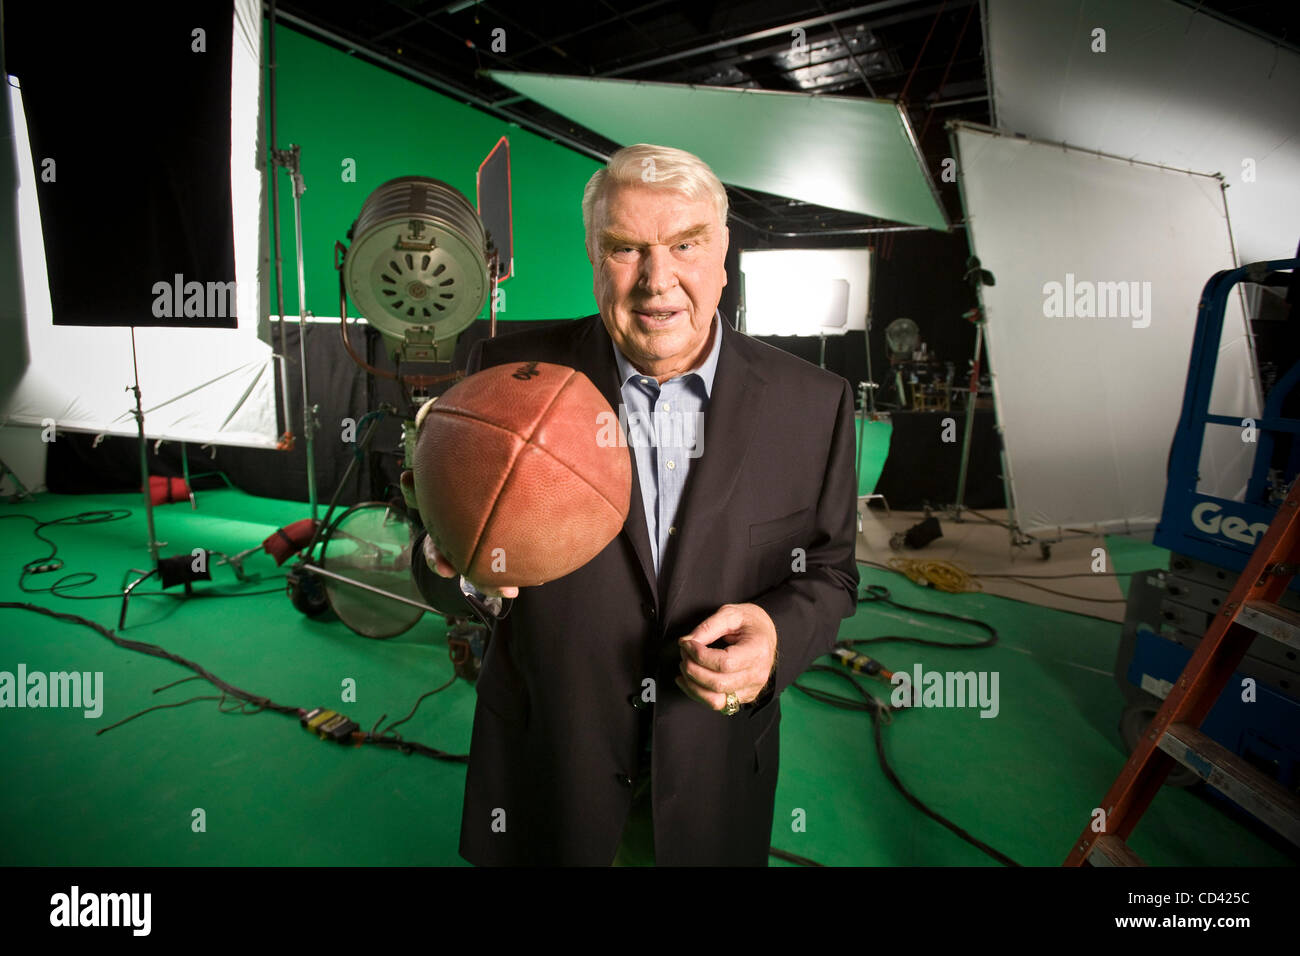 Jul 17, 2008 - Pleasanton, California, USA - Former football player and coach JOHN MADDEN during a break while shooting a spot for an EA Sports ad campaign at a Pleasanton, CA production studio. (Credit Image: © Martin Klimek/ZUMA Press) RESTRICTIONS: Shot For USA TODAY Job # 34471 Stock Photo